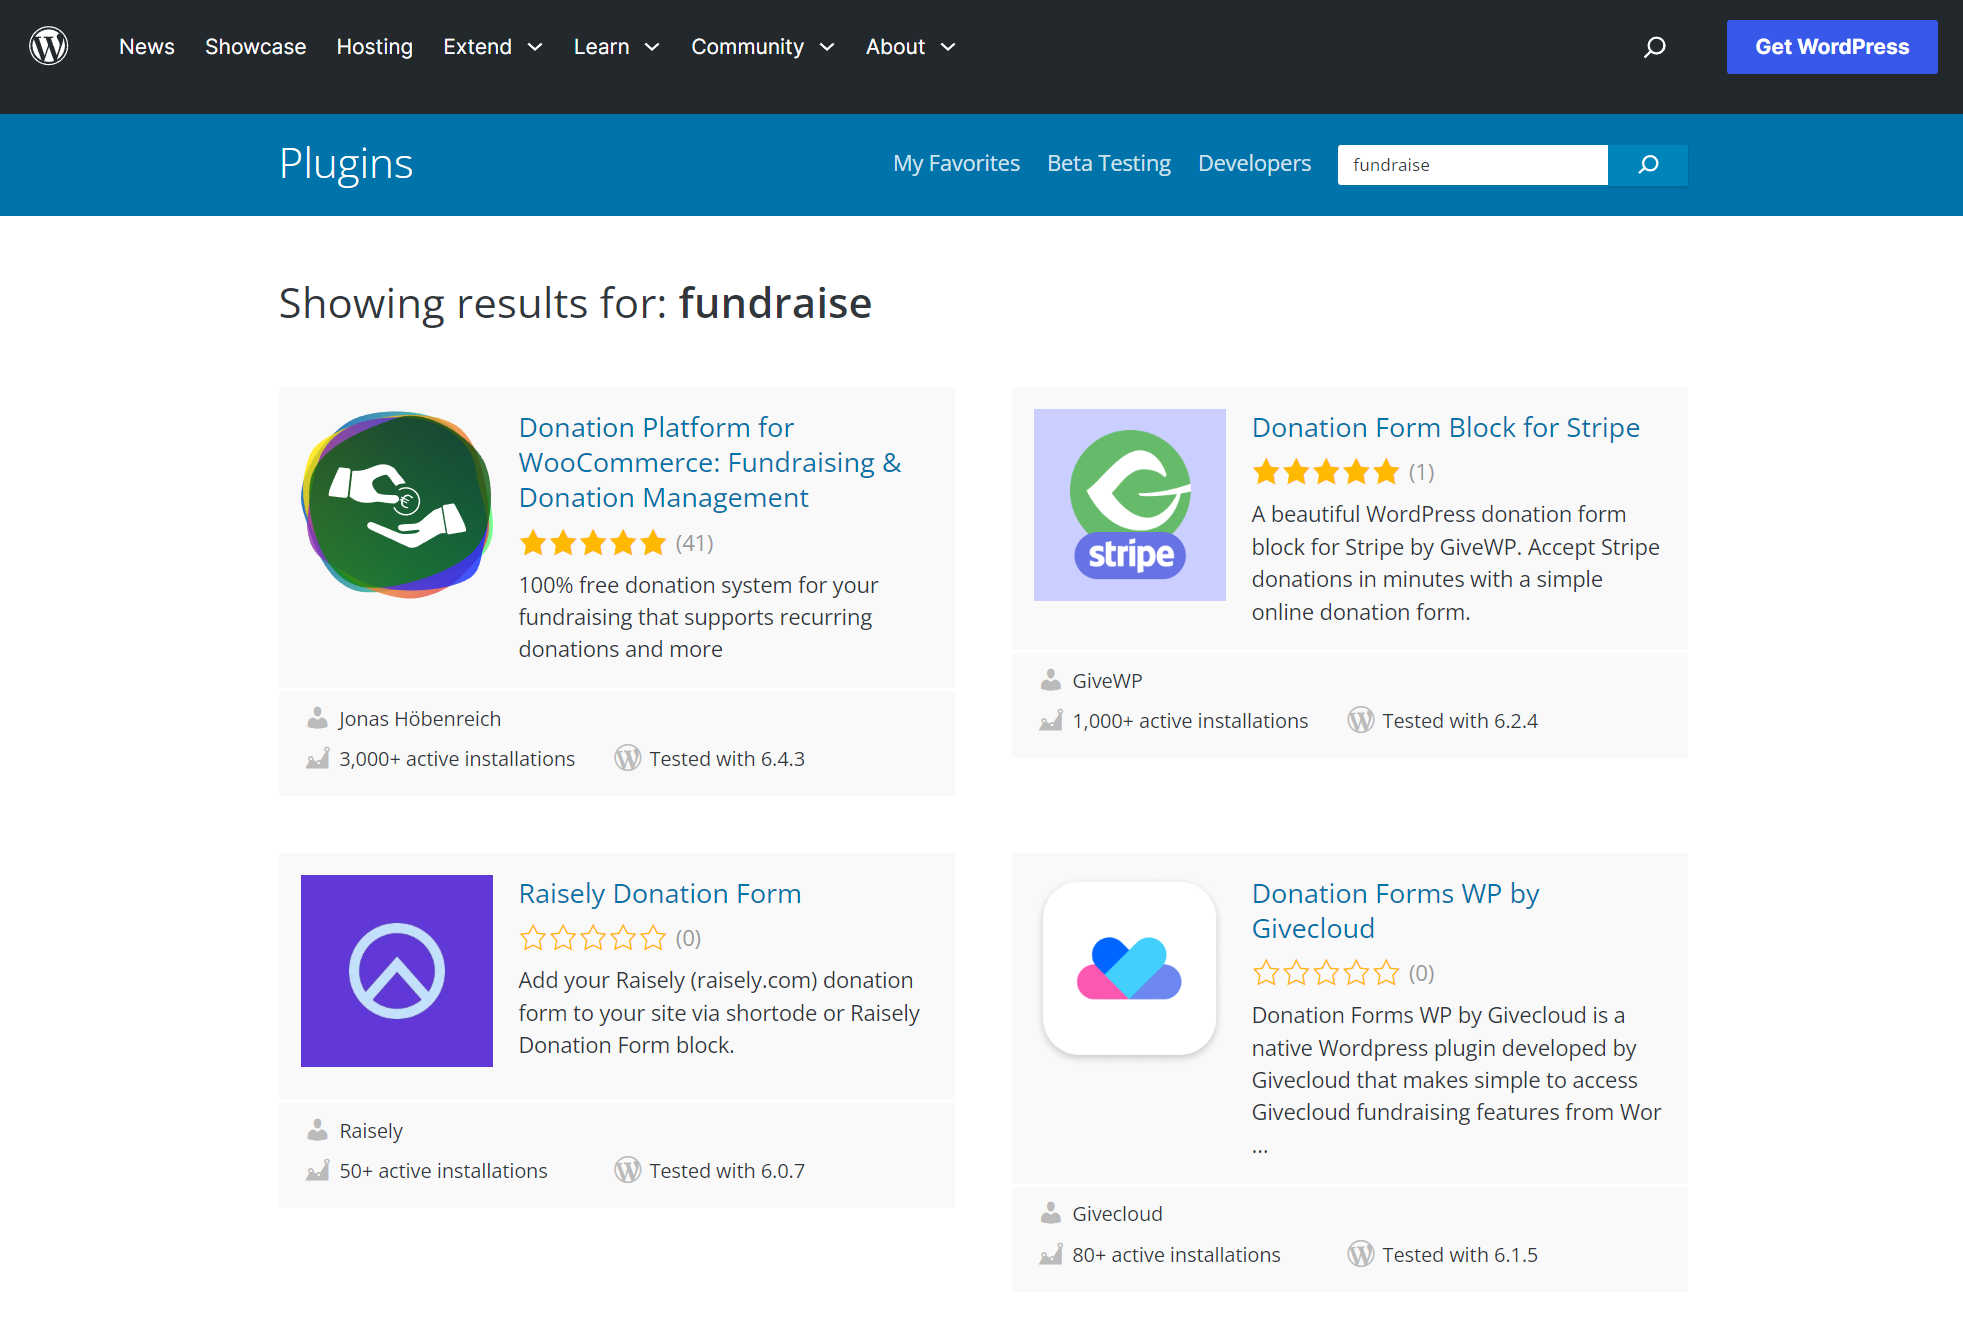 A screenshot of a WordPress plugins search result page showing various fundraising-related plugins with user ratings, installation counts, and compatibility information.